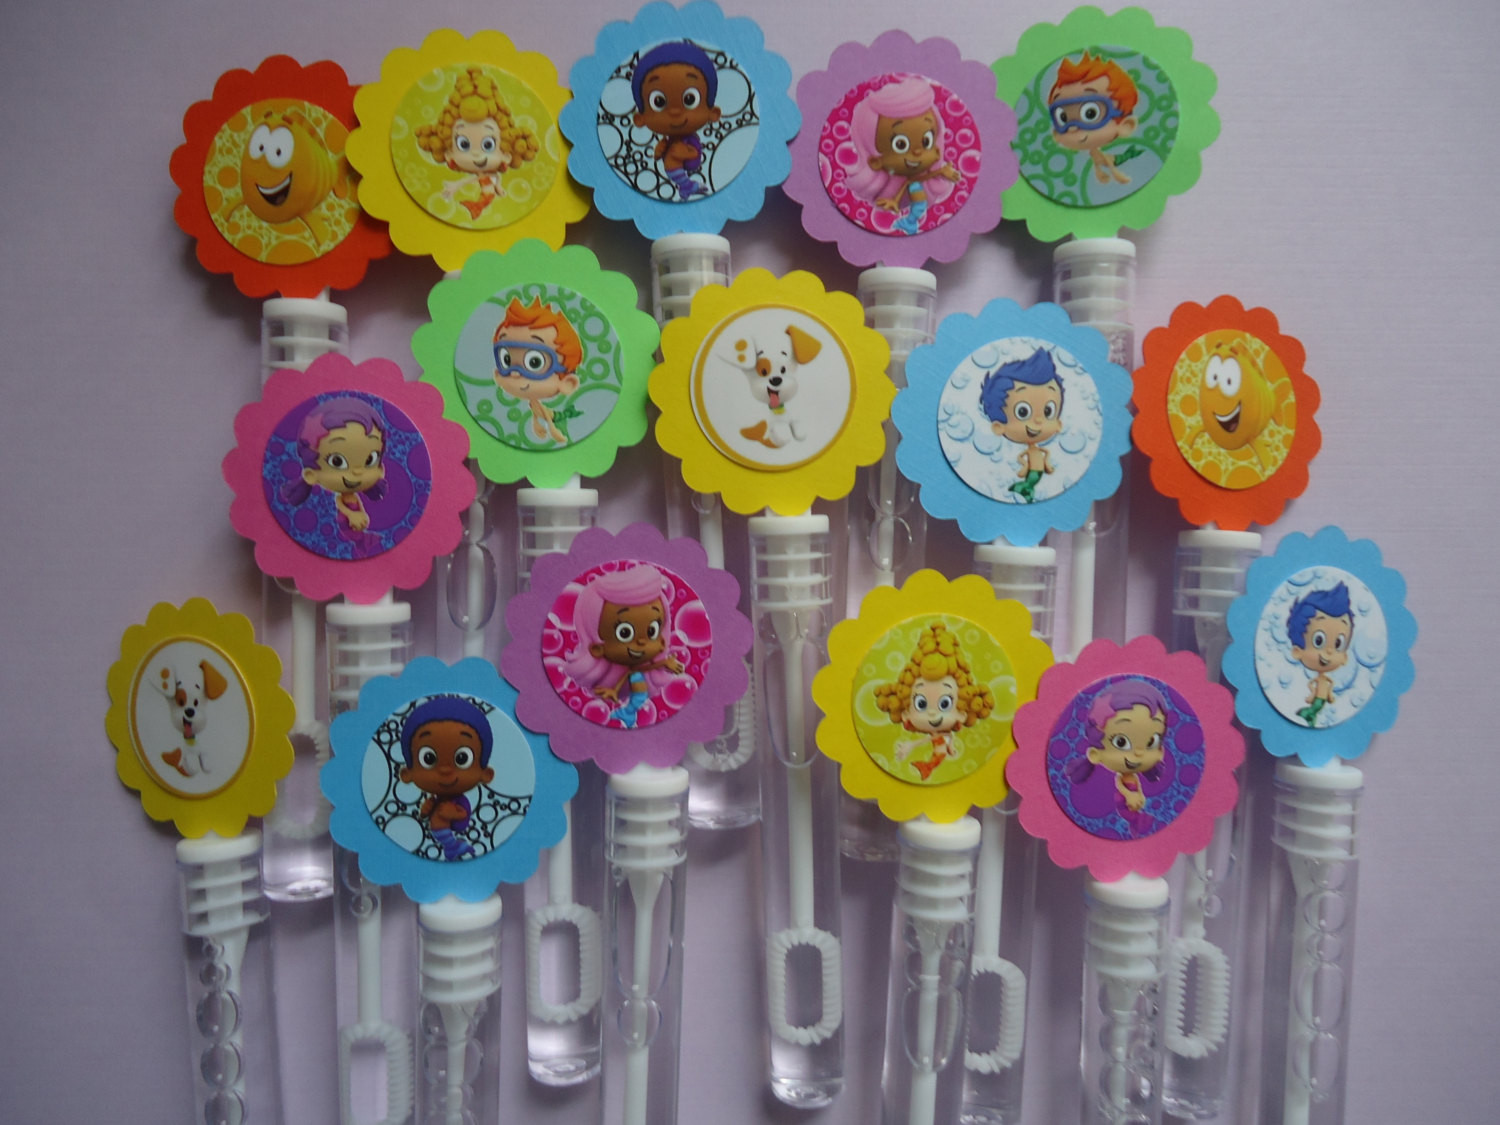 Bubble Guppies Birthday Party Supplies
 Bubble Guppies party favors bubbles and wand by SassyCreationz